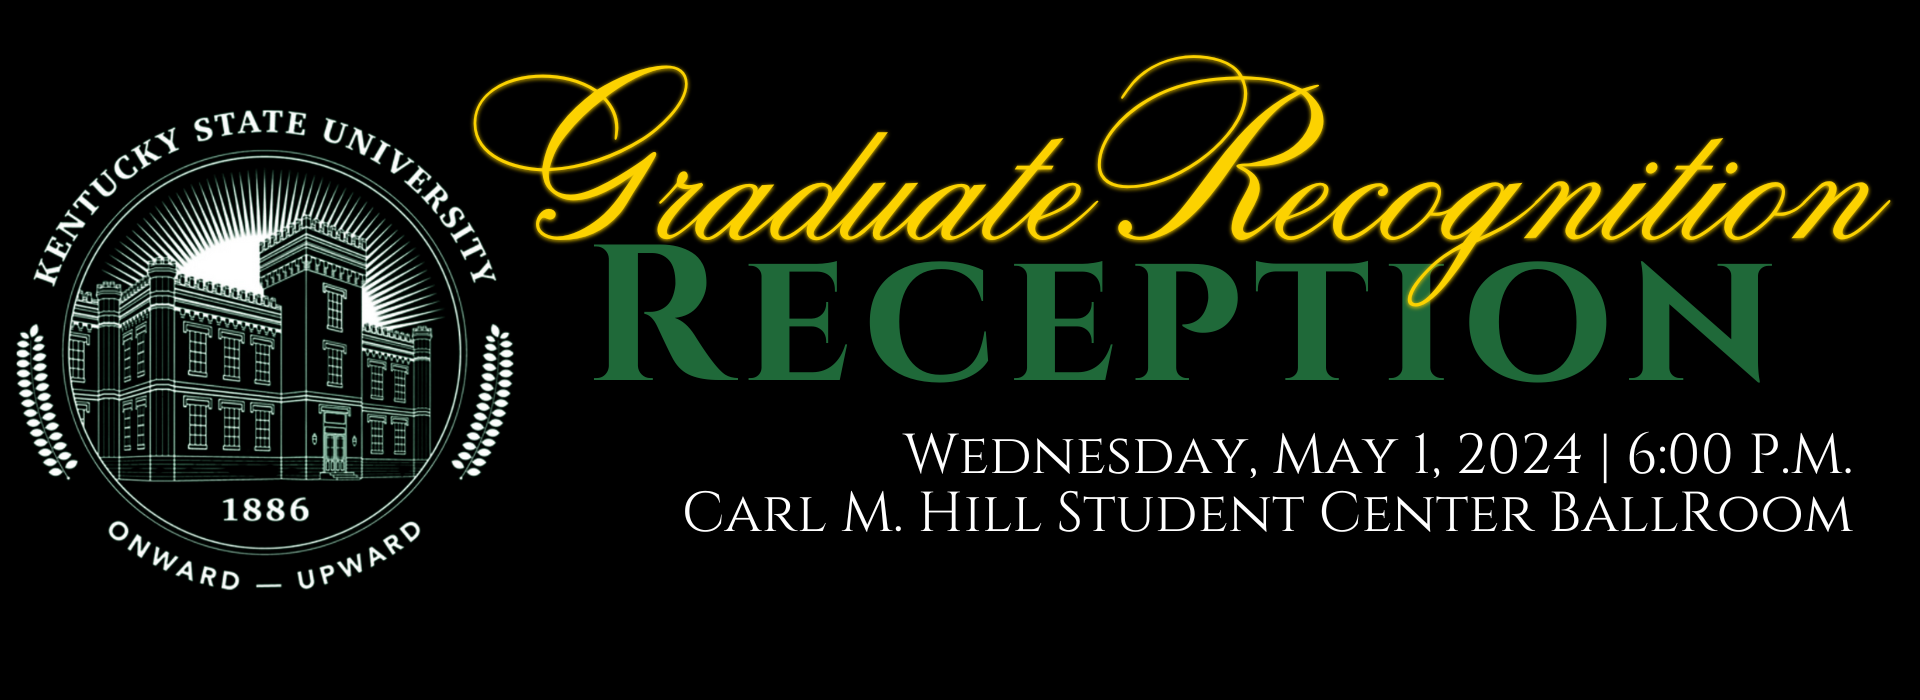 2024 Graduate Recognition Reception Graphic - Wed. May 1; 6pm at Carl M. Hill Student Center Ballroom